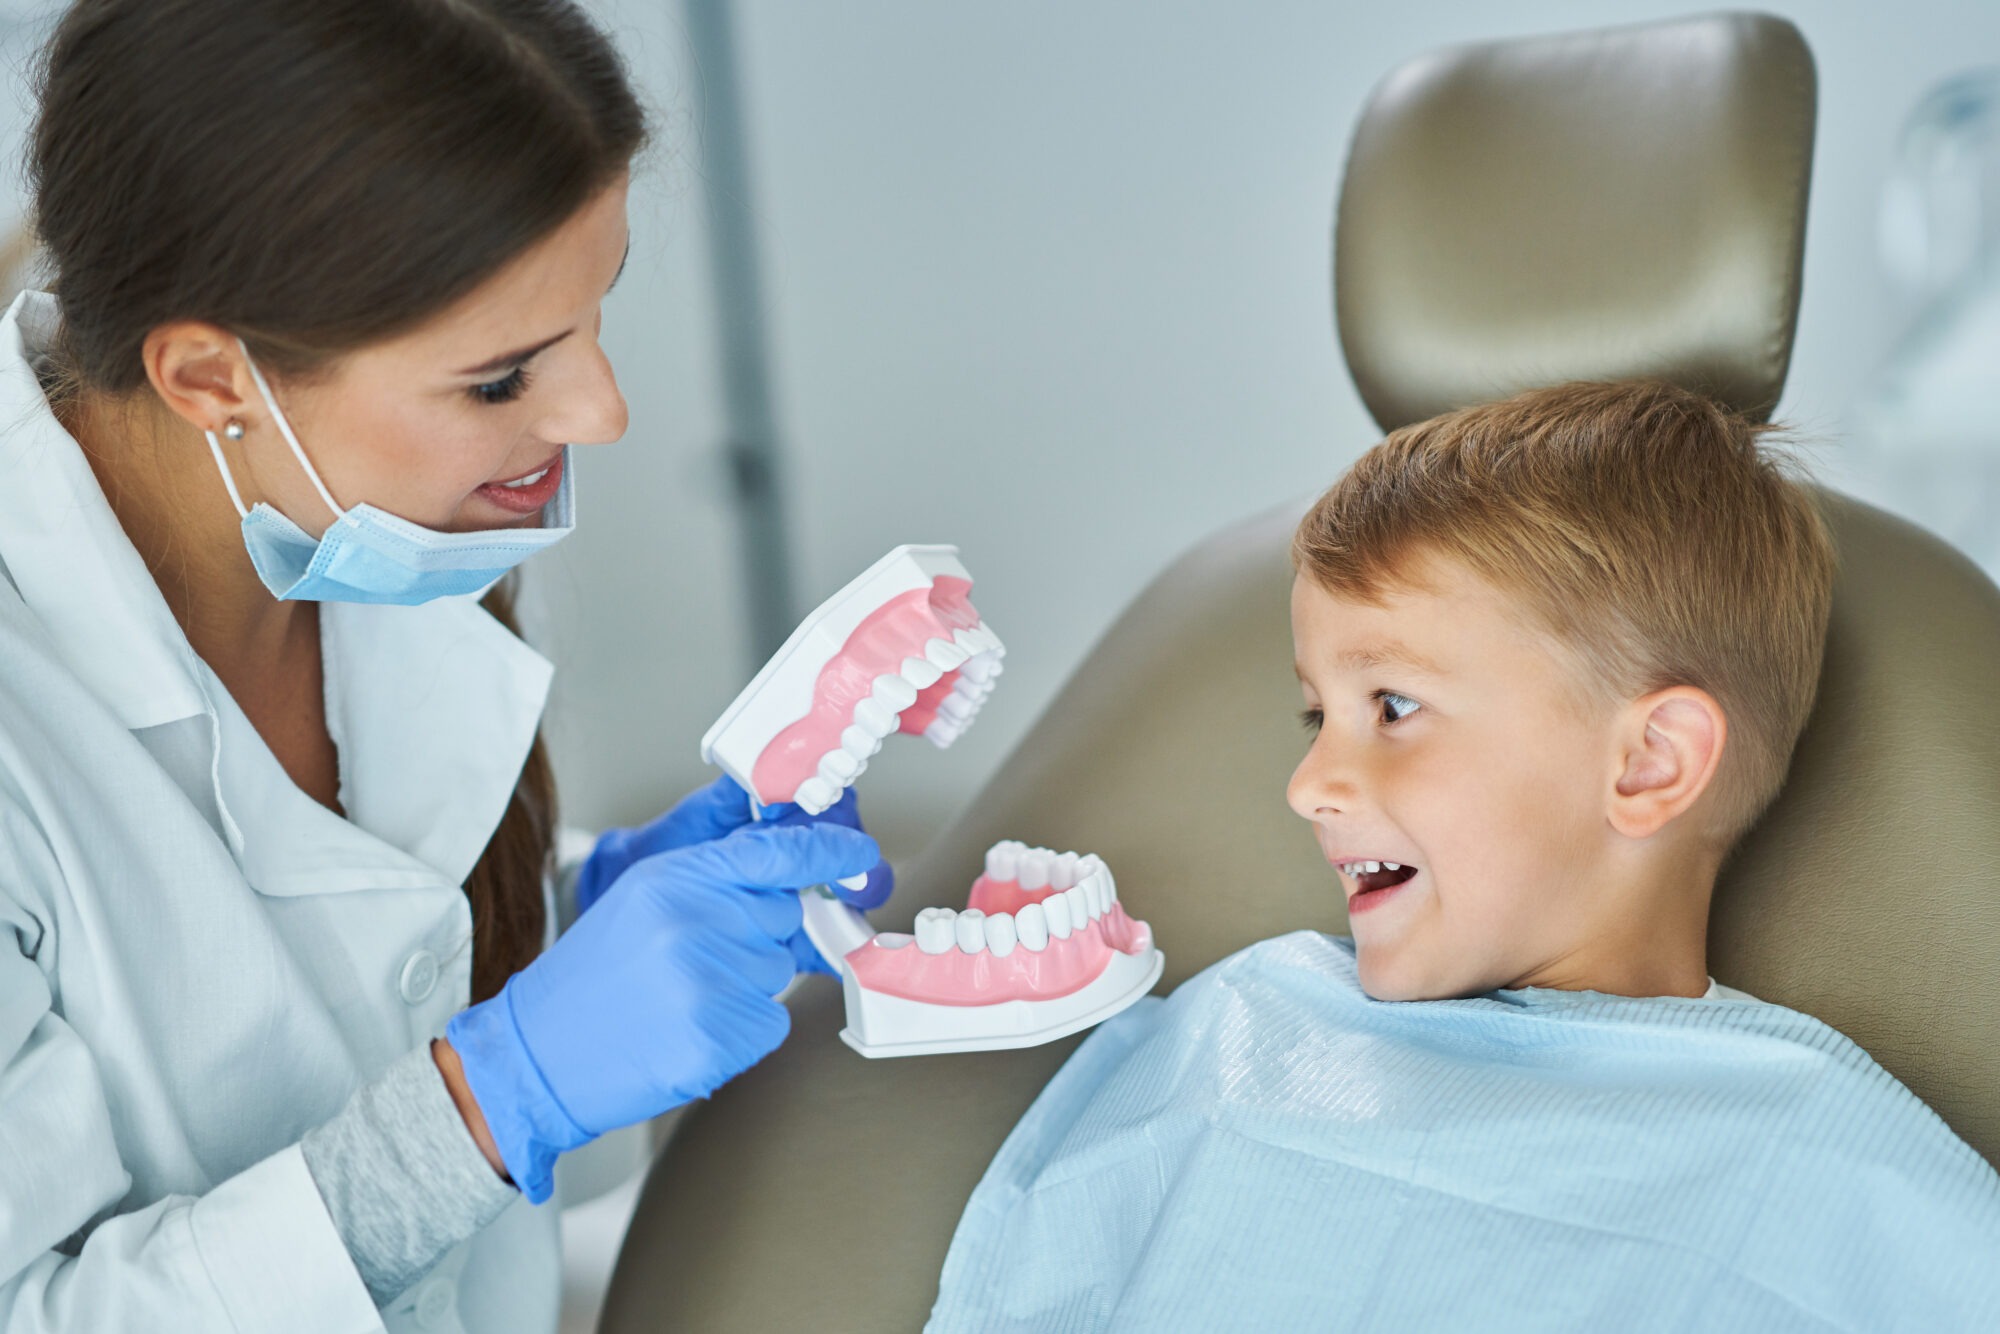 7 Reasons Your Child Should Visit an Orthodontist by Age 7